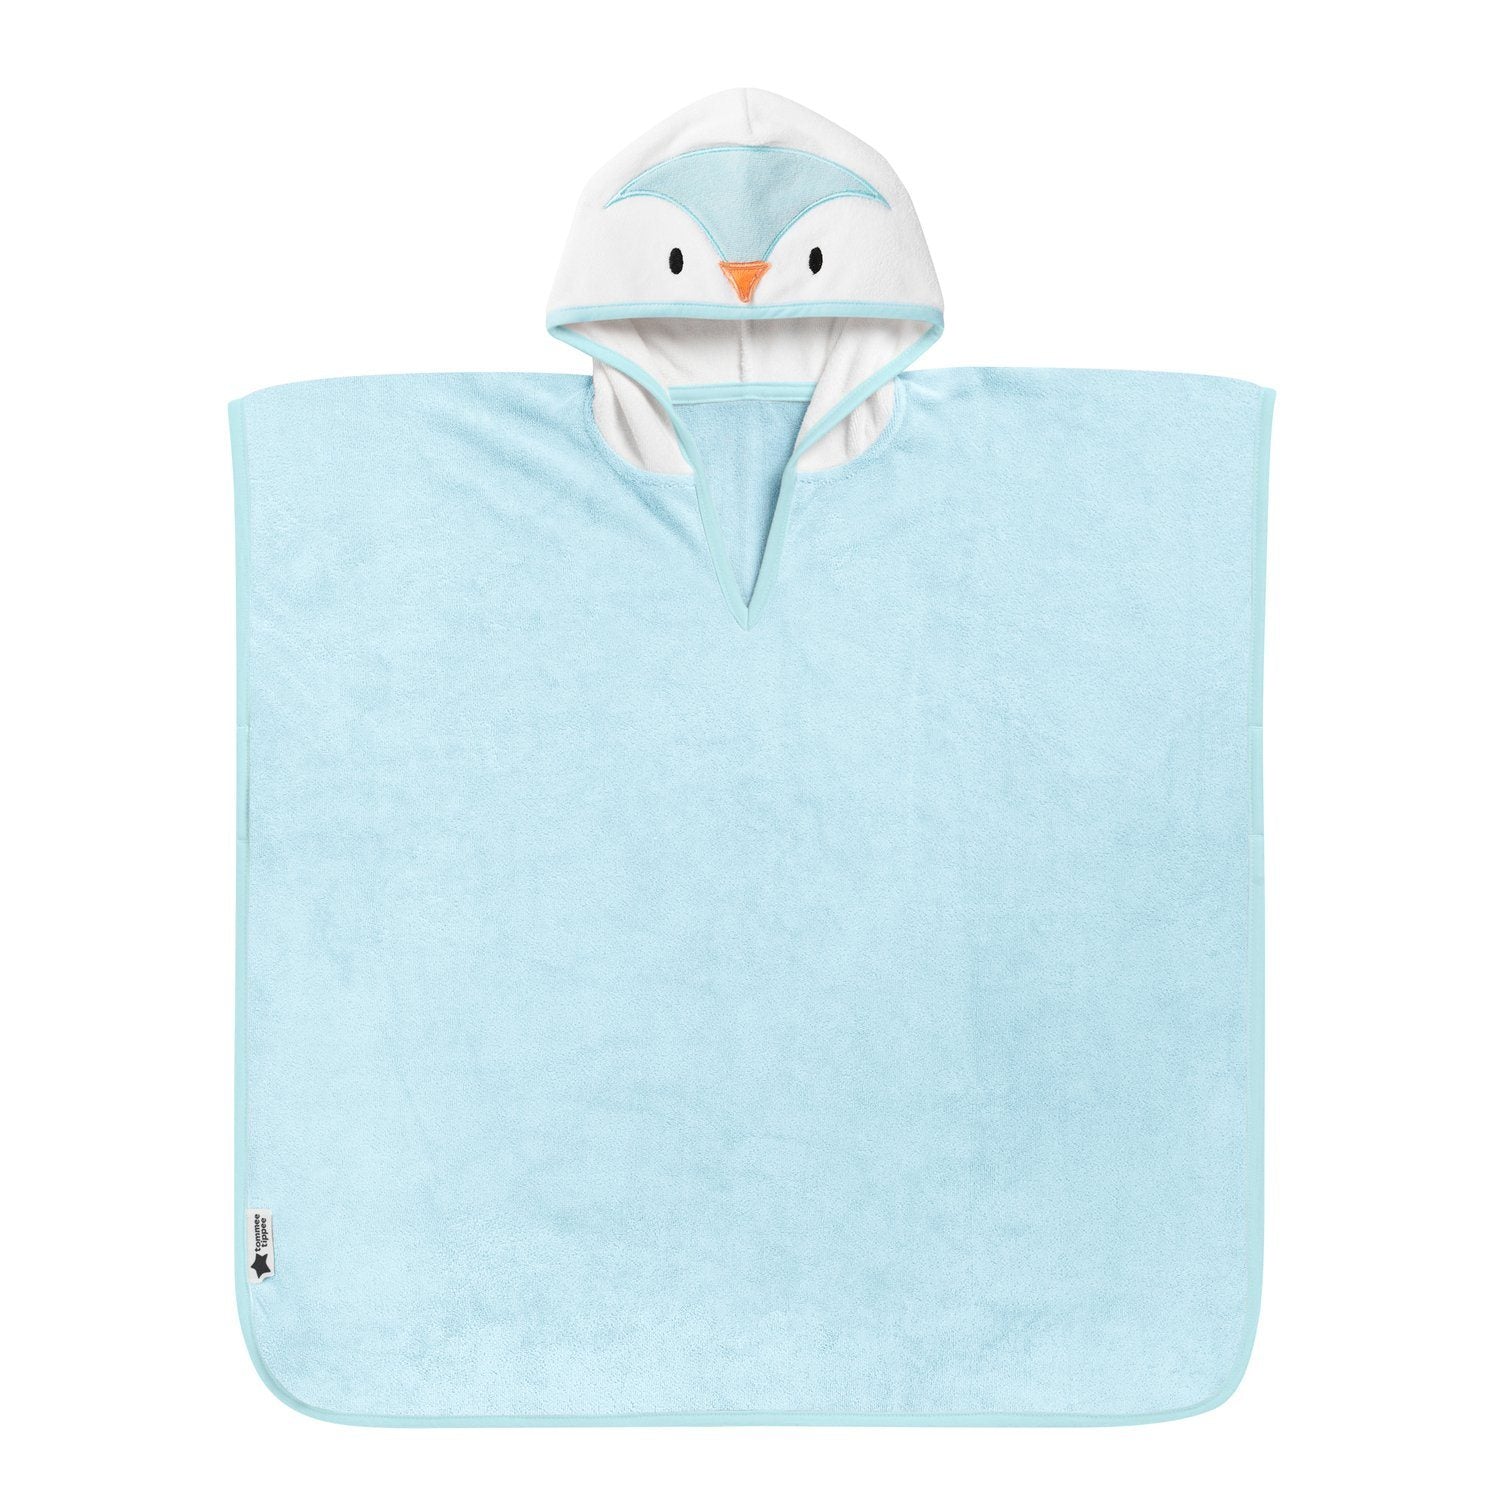 Tommee Tippee - Toalhas Anne Claire Baby Store Groponcho Azul 